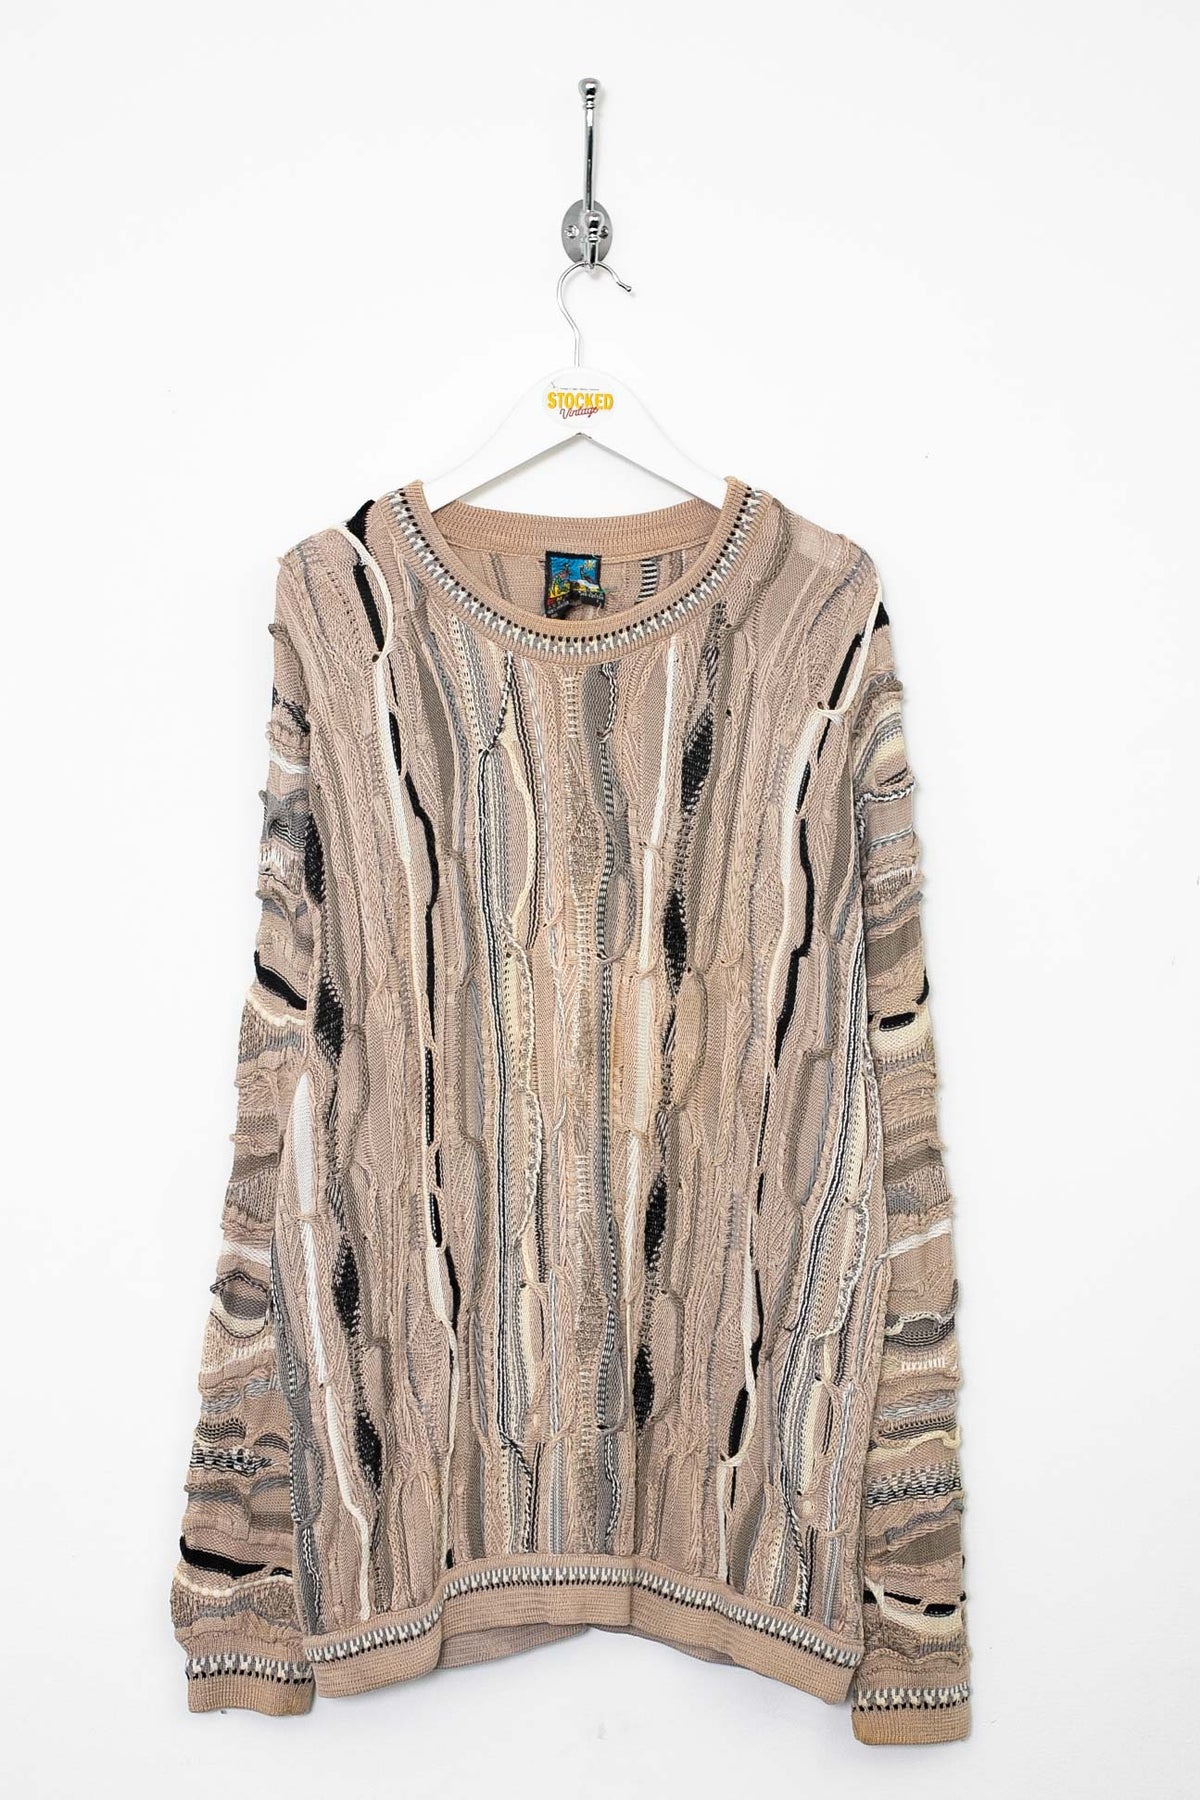 00s Emaroo Coogi Style Knit Jumper (L)